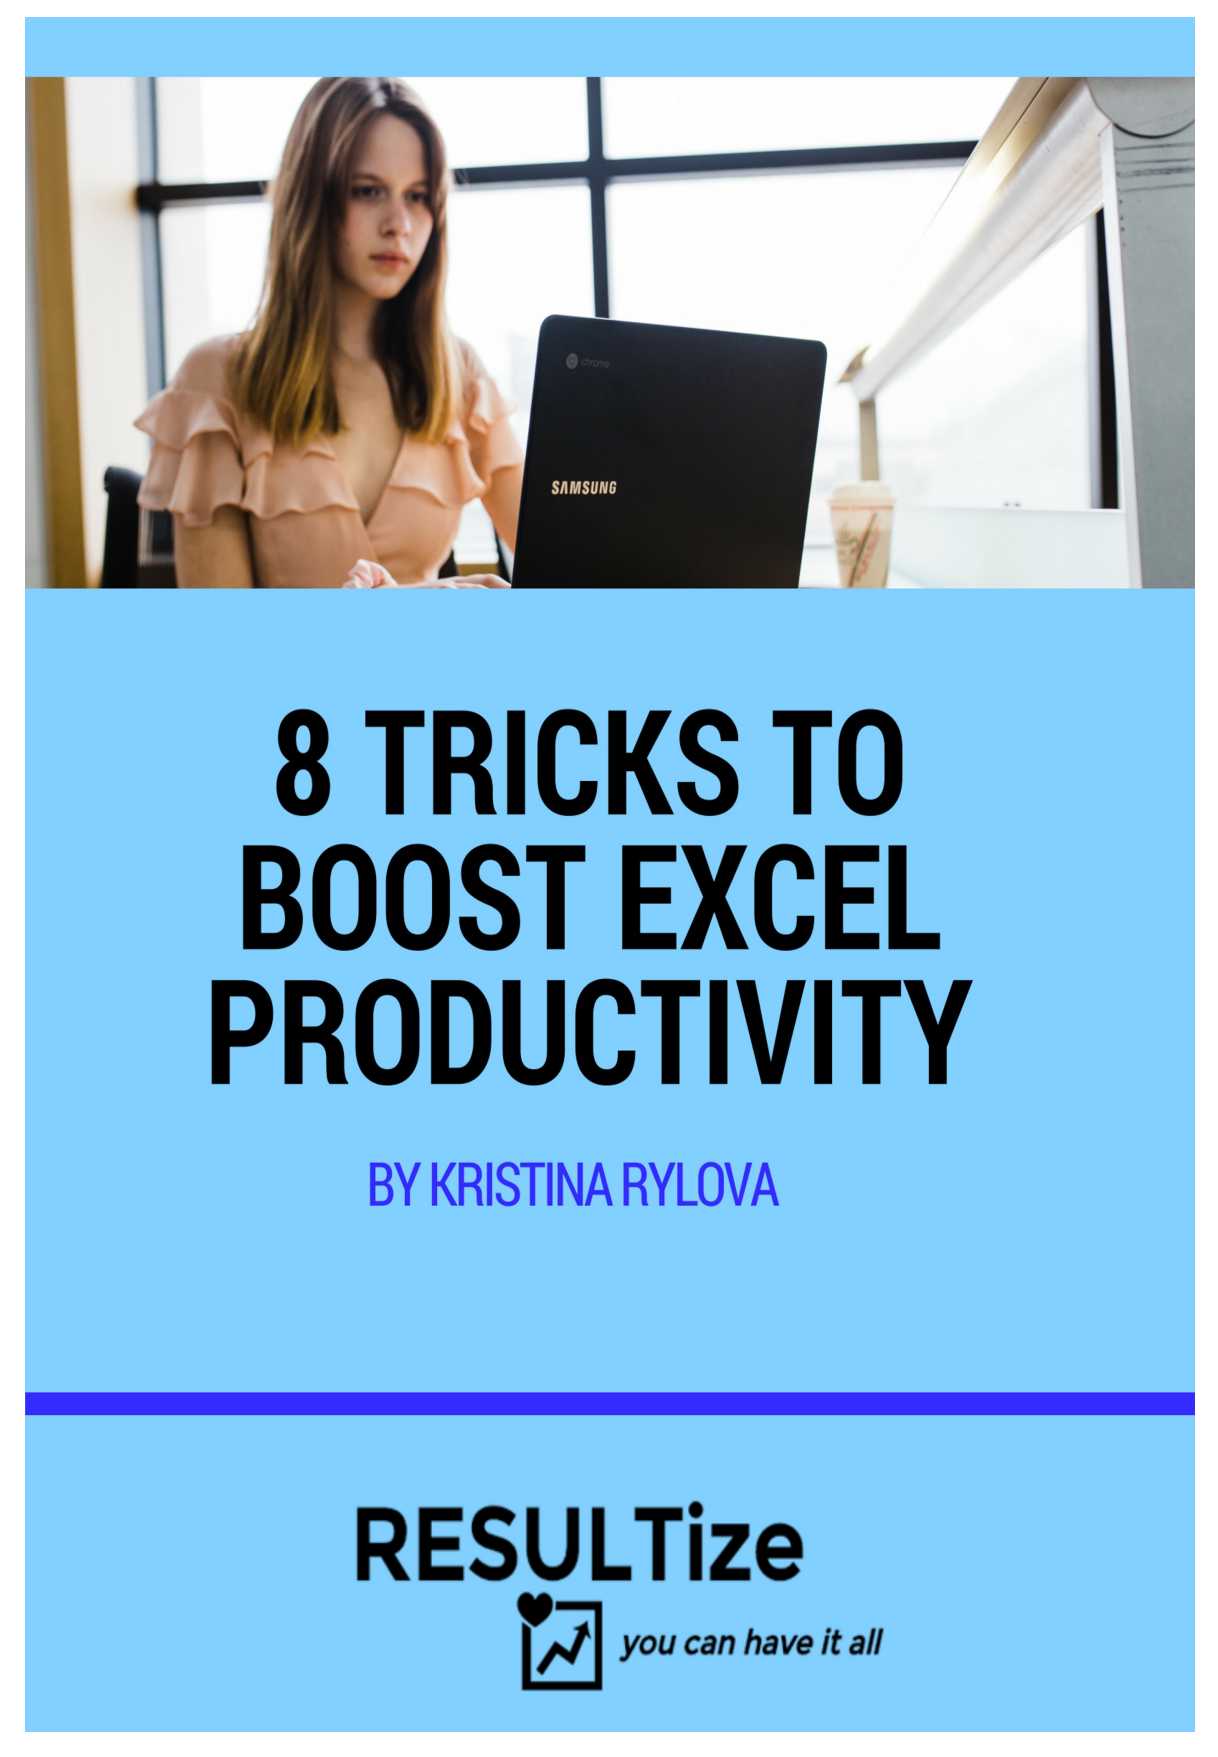 8 tricks to boost Excel productivity FREE PDF